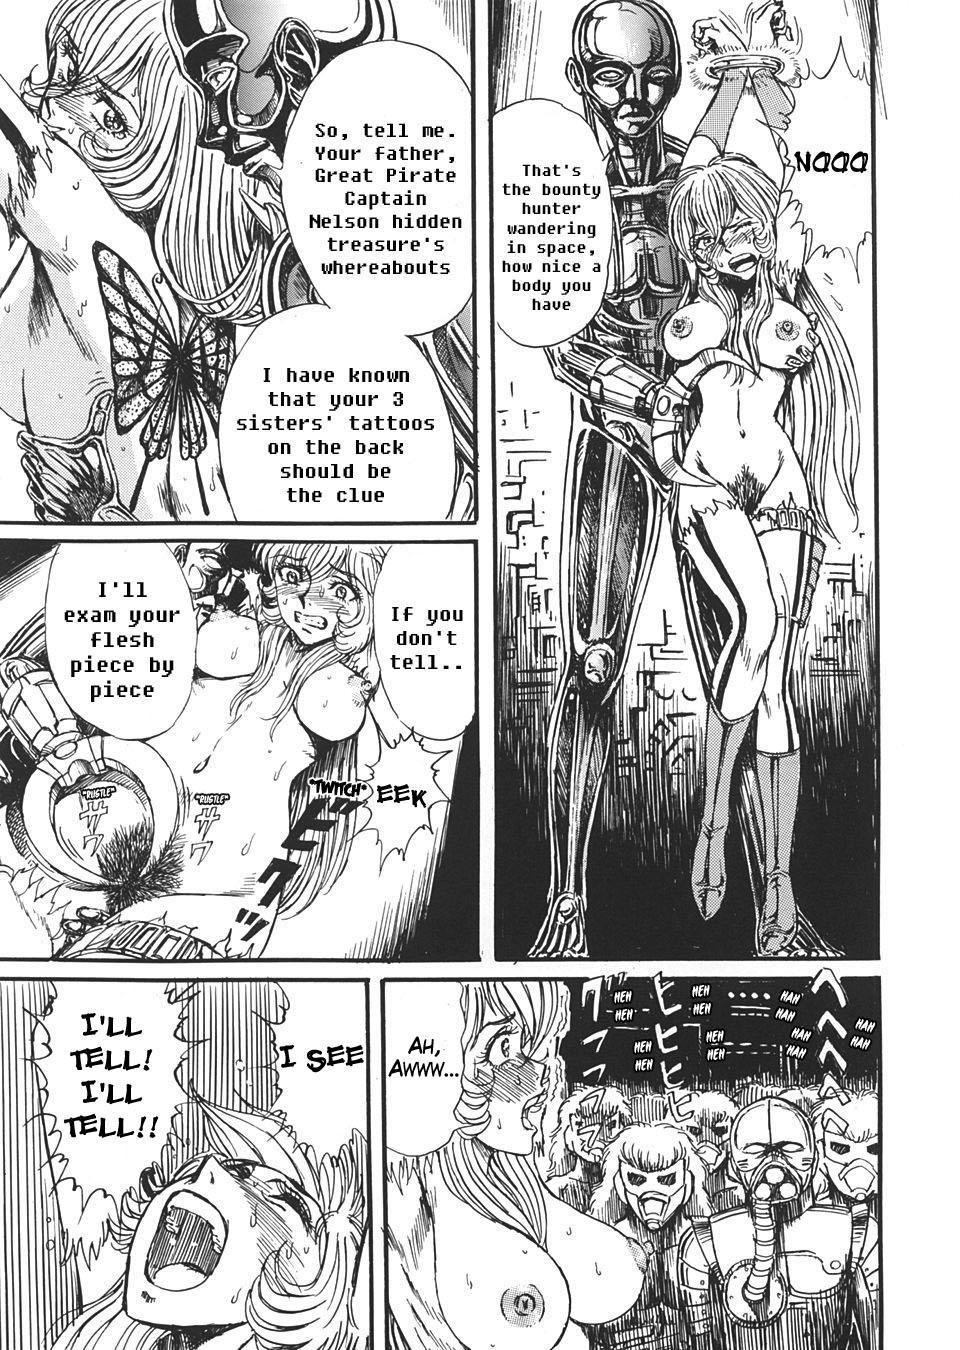 Scandal Jump Dynamite Vol.3 - Space adventure cobra Sex Toy - Page 4